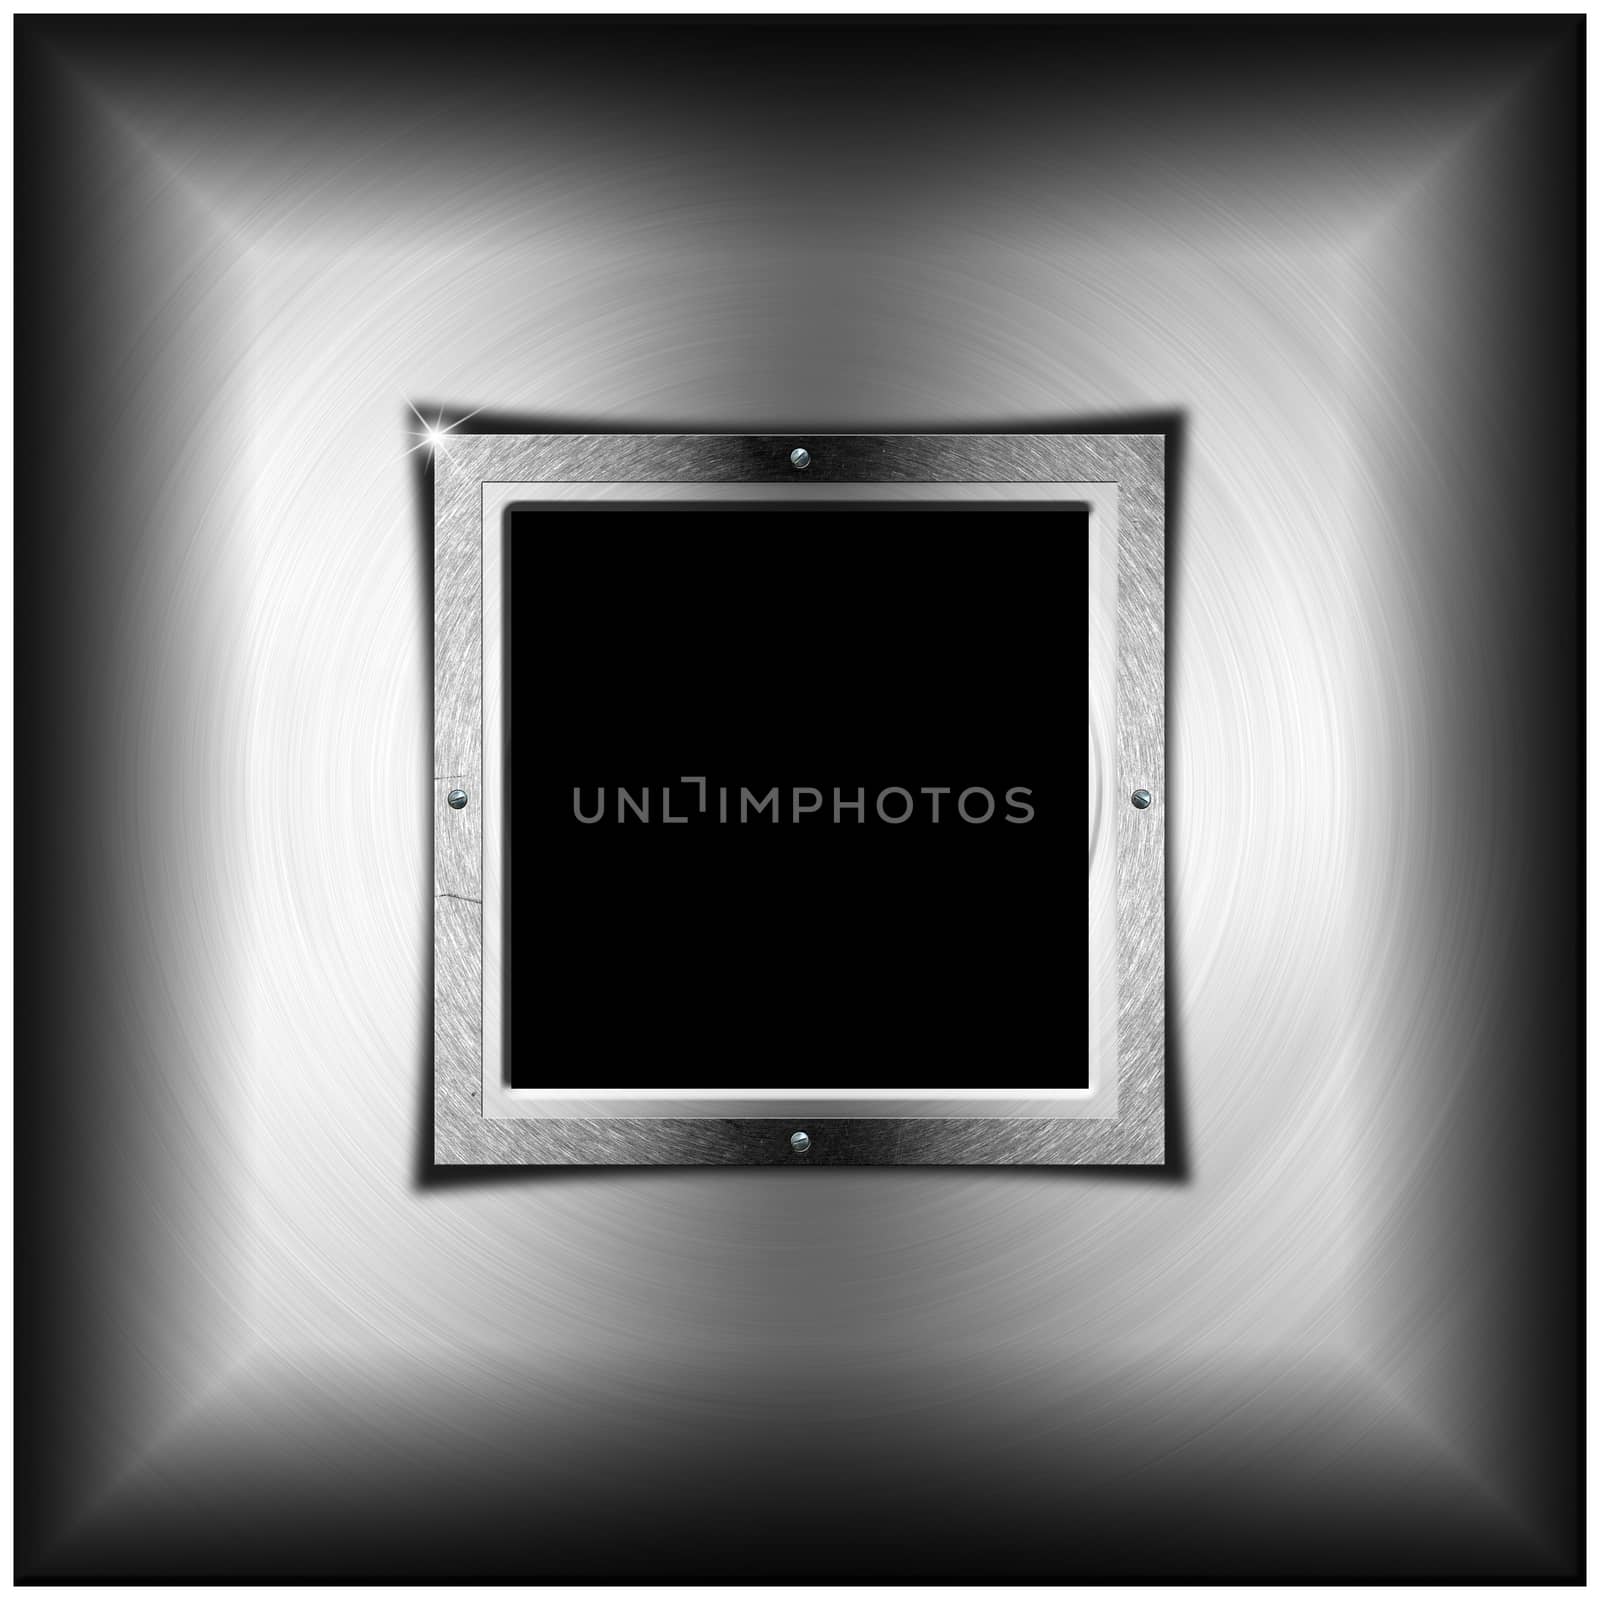 Metallic and industrial template background with square black screen
